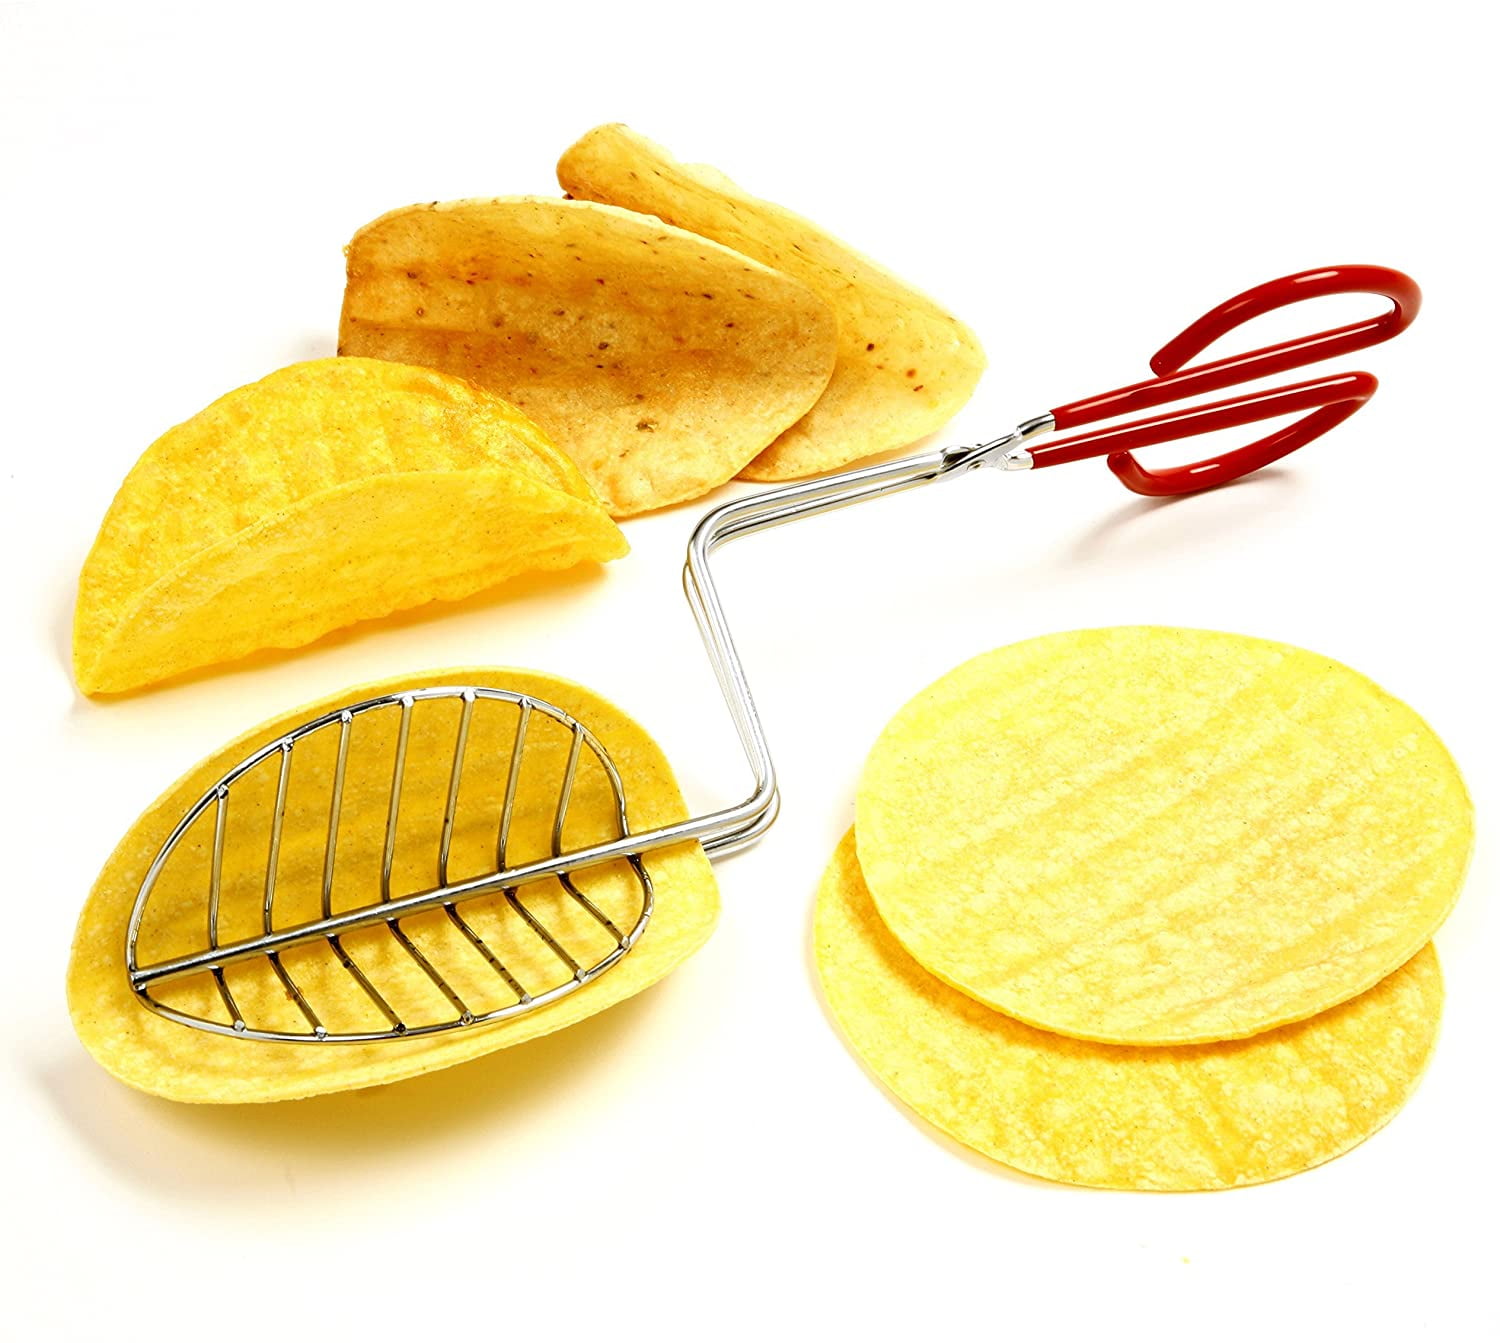 VIVEFOX Taco Maker Press Fried Taco Shells Mold,13.8*4.7*3.5 Inches taco  shell mold for frying